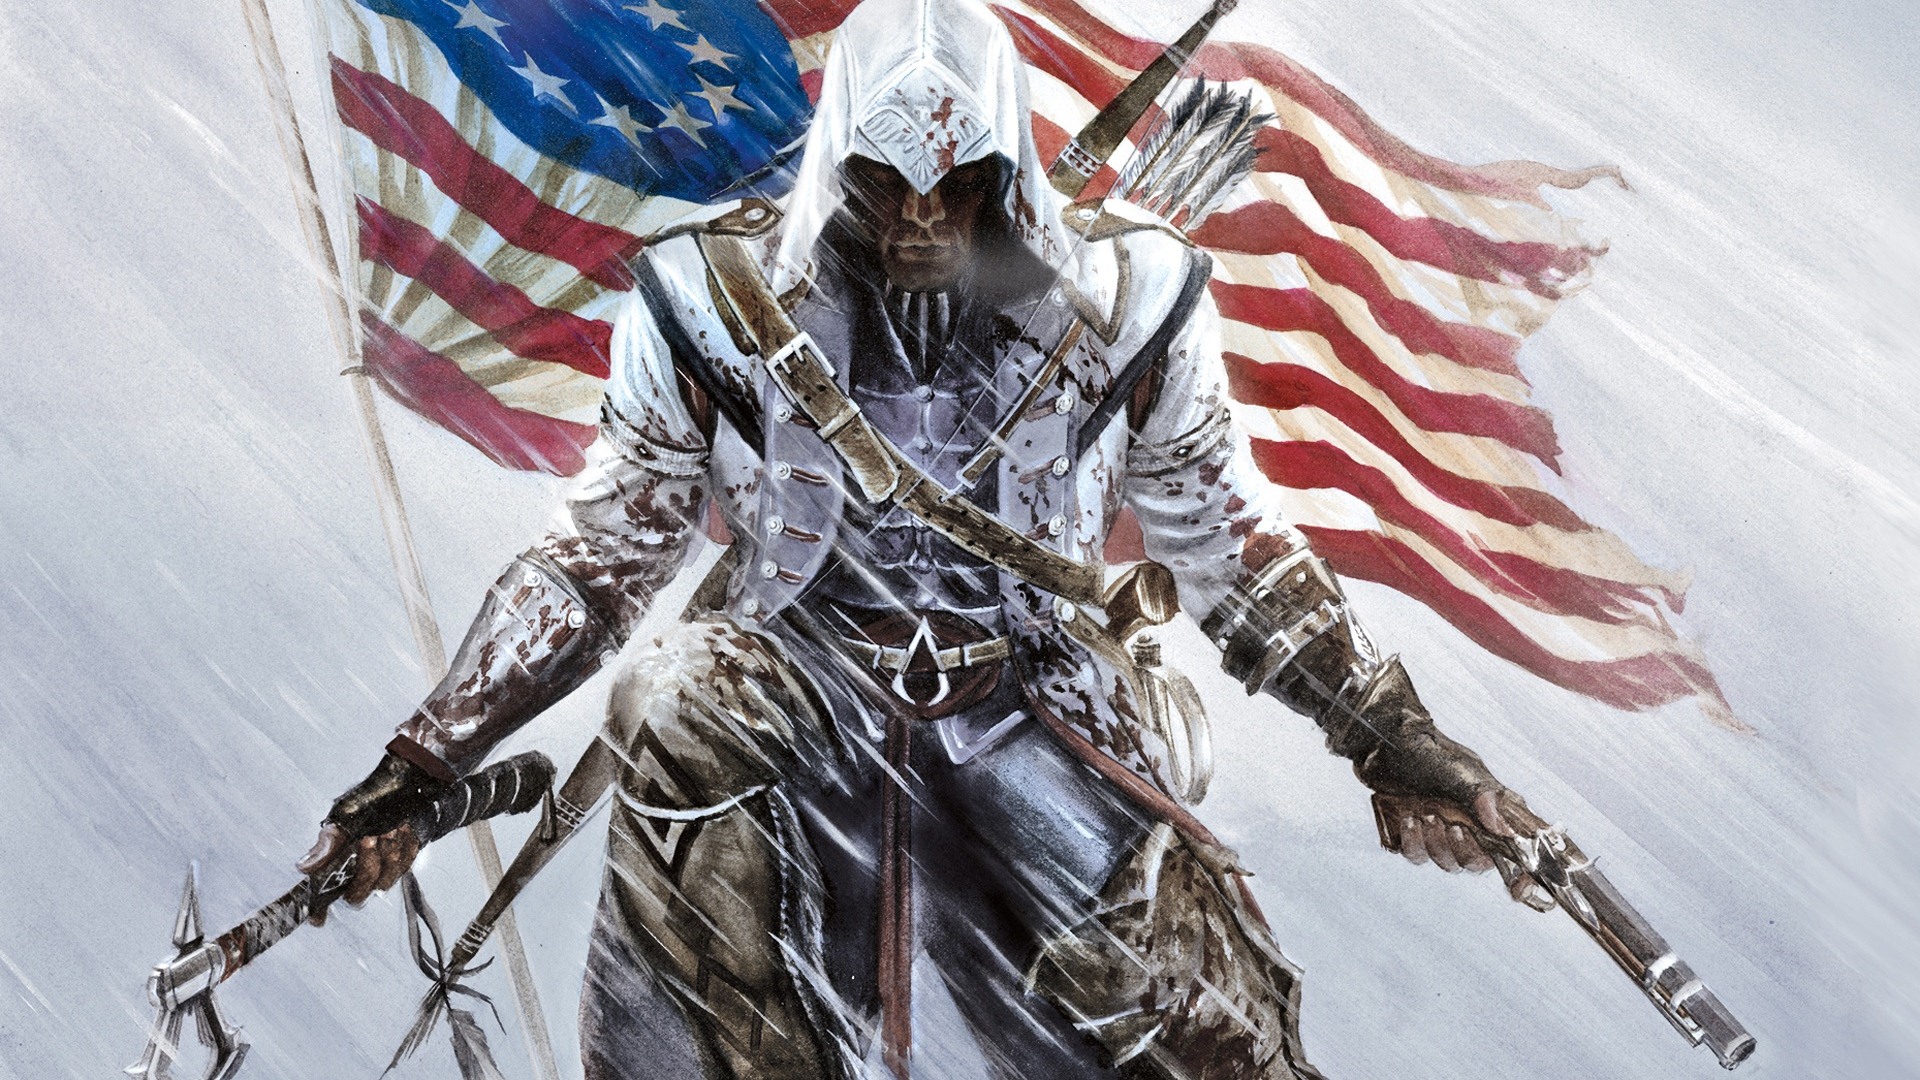 Assassin's Creed 3 HD wallpapers #1 - 1920x1080